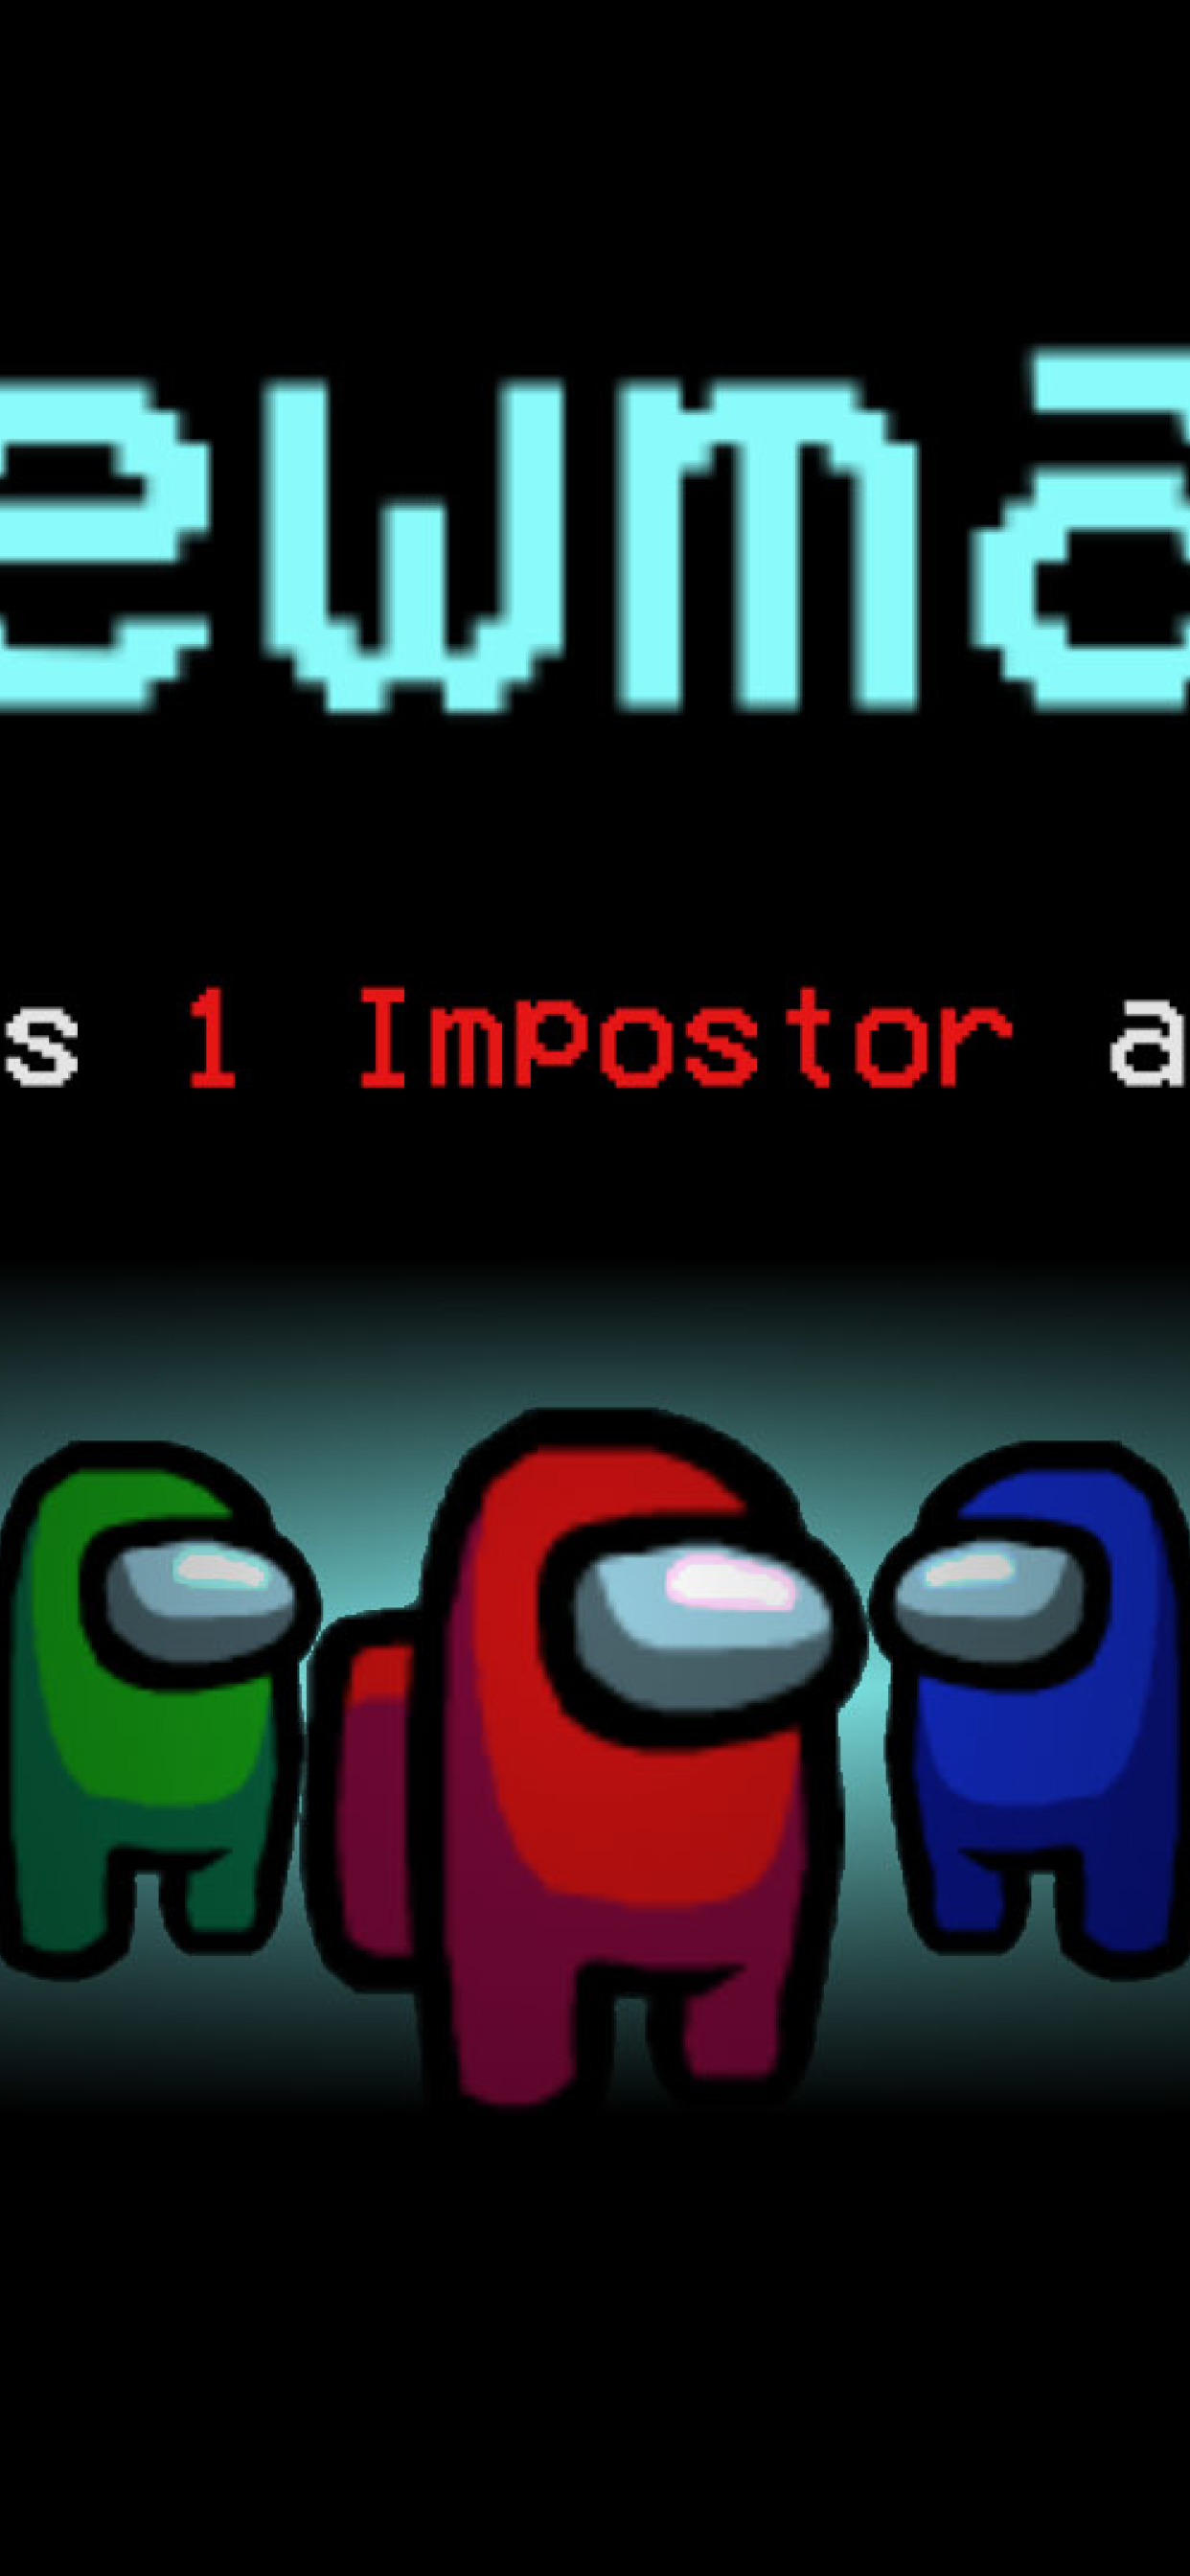 1242x26 There Is 1 Imposter Crewmate Among Us Iphone Xs Max Wallpaper Hd Games 4k Wallpapers Images Photos And Background